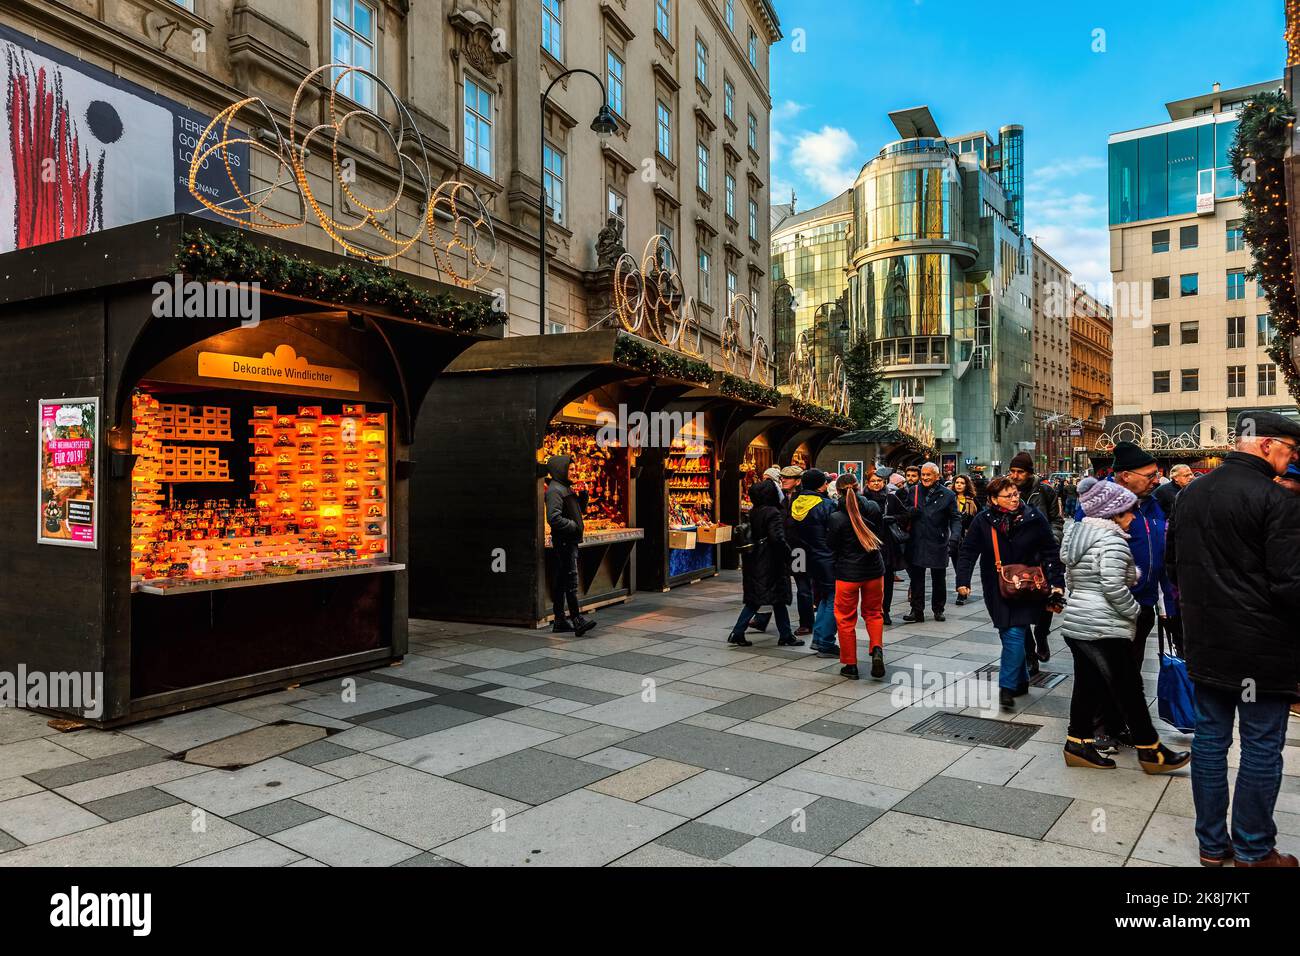 People walking along illuminated  kiosks selling souvenirs and Christmas decorations in Vienna, Austria. Stock Photo